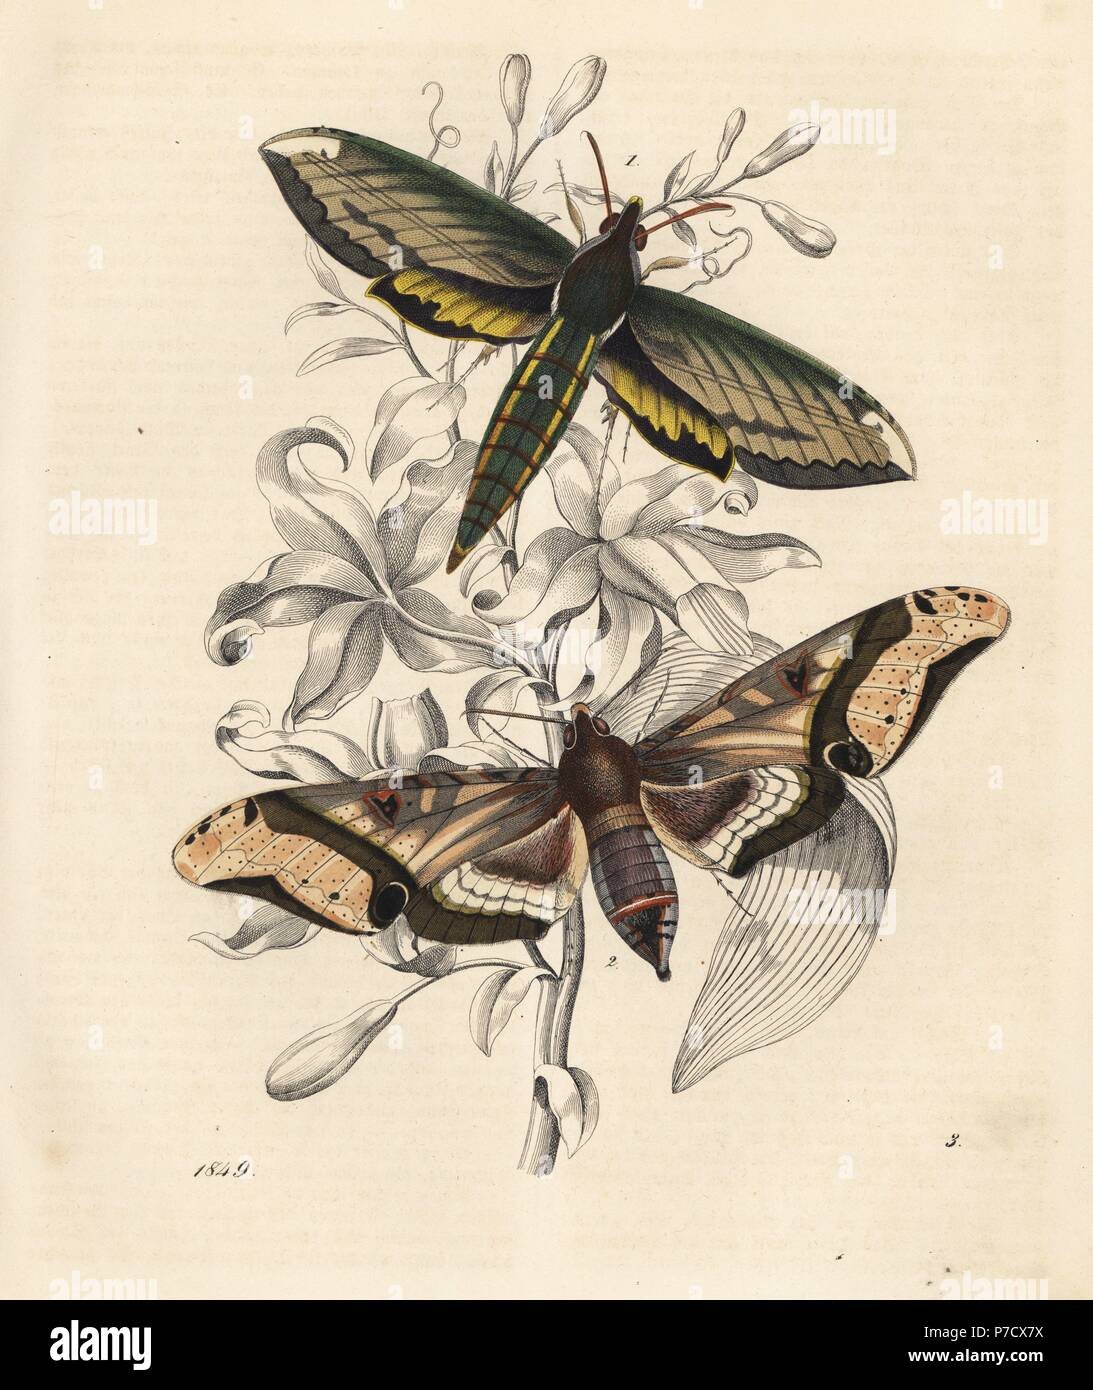 Nessus sphinx, Amphion floridensis 1, and Amplypterus panopus 2 moths. Handcoloured lithograph from Carl Hoffmann's Book of the World, Stuttgart, 1849. Stock Photo